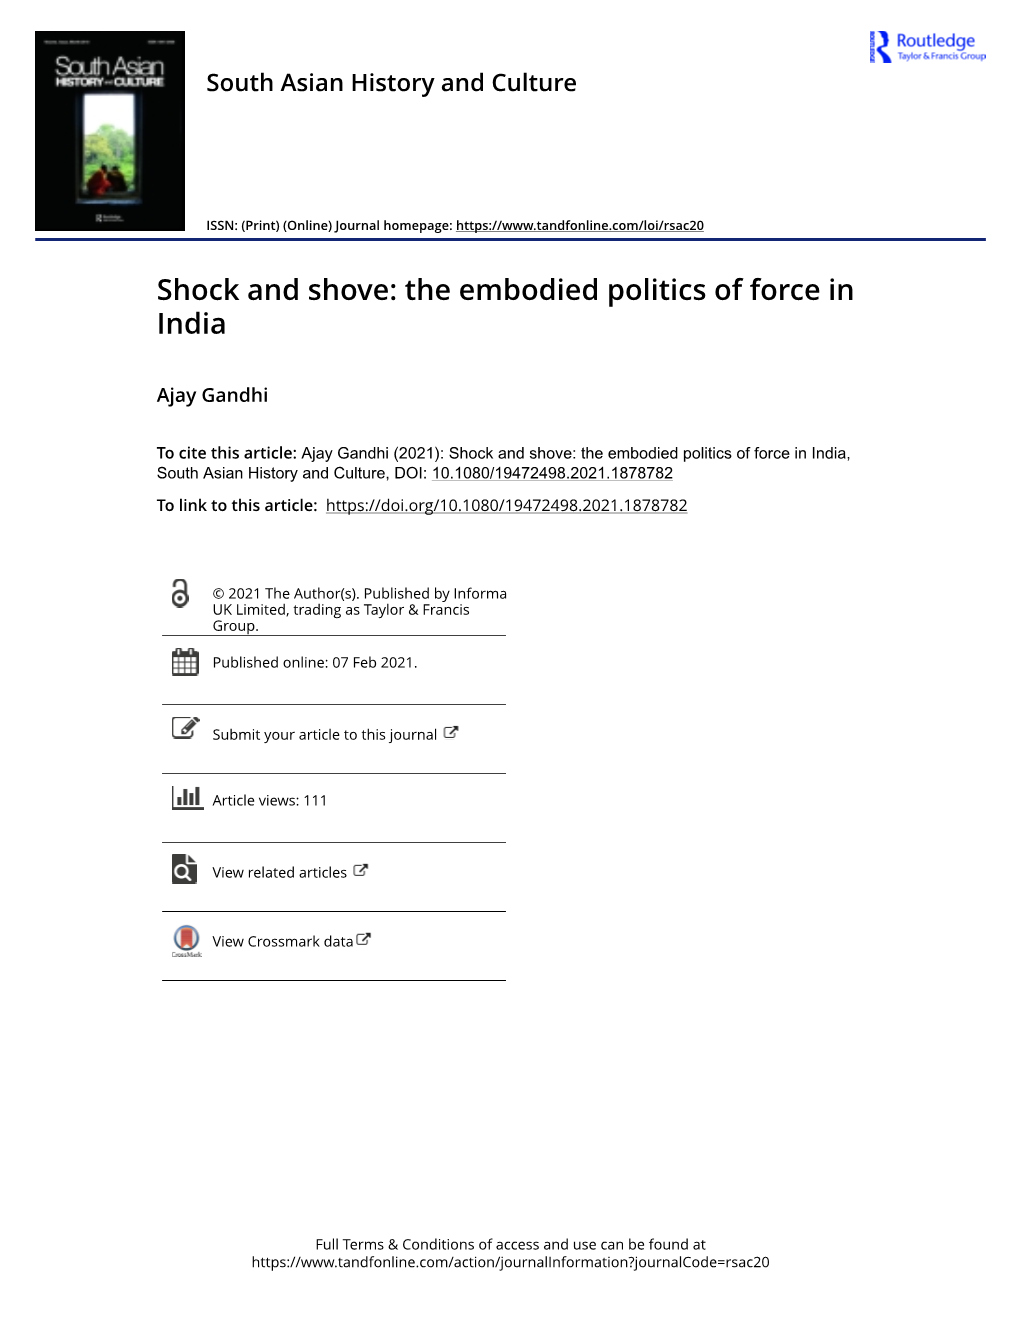 Shock and Shove: the Embodied Politics of Force in India